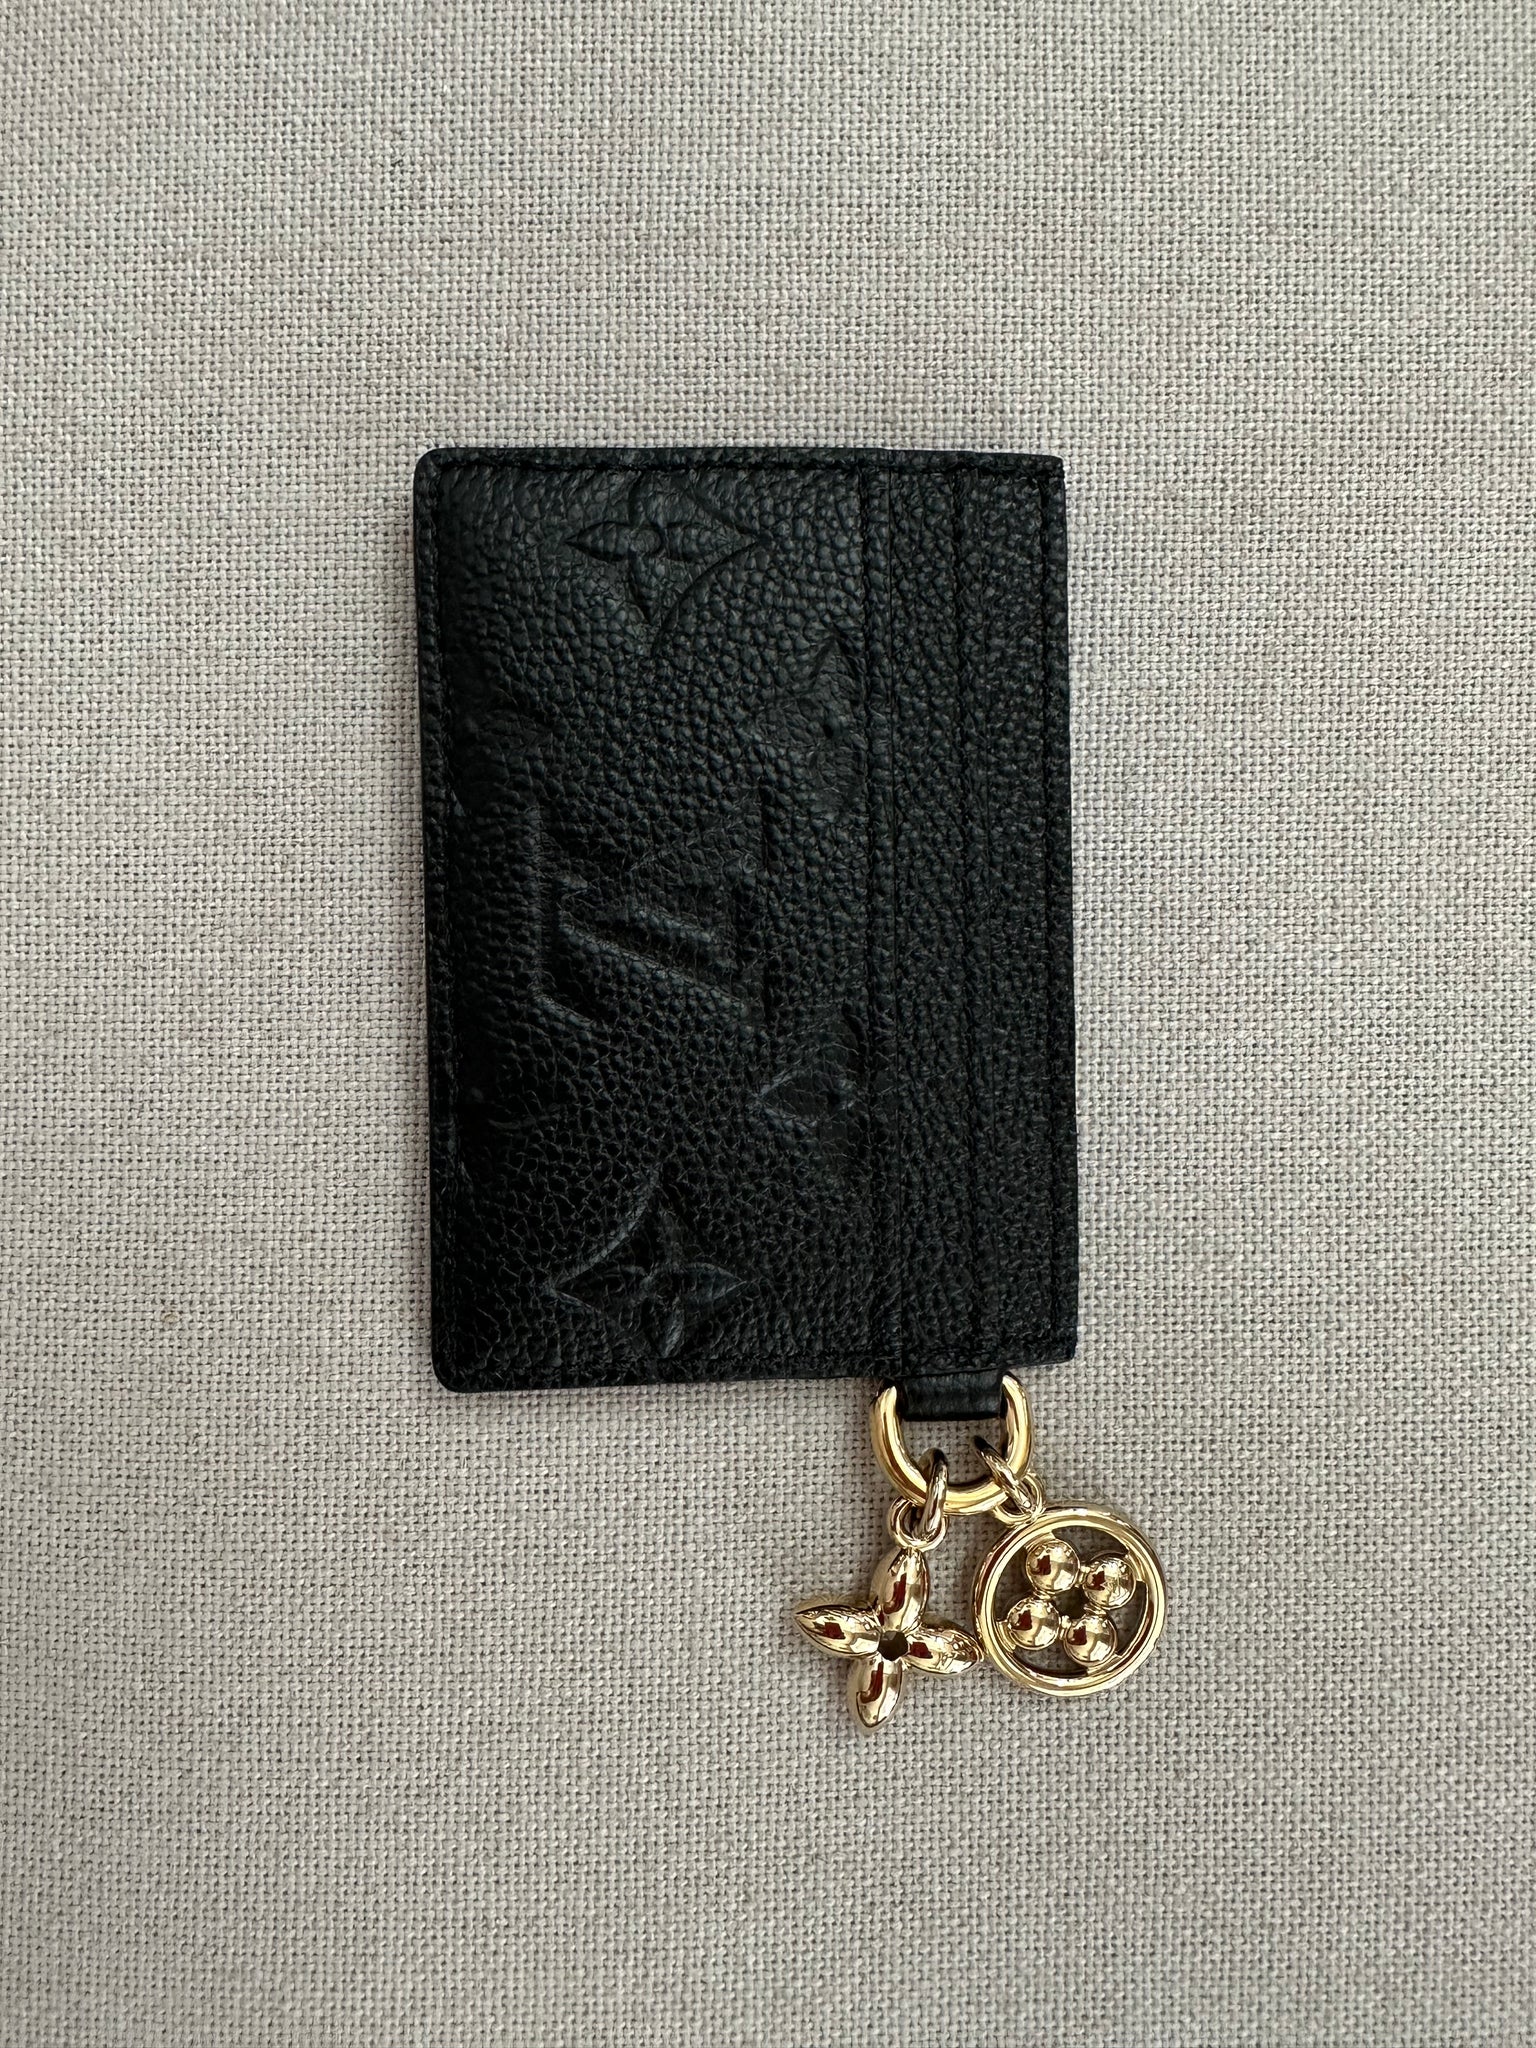 Louis Vuitton M82132 LV Charms Card Holder , Black, One Size